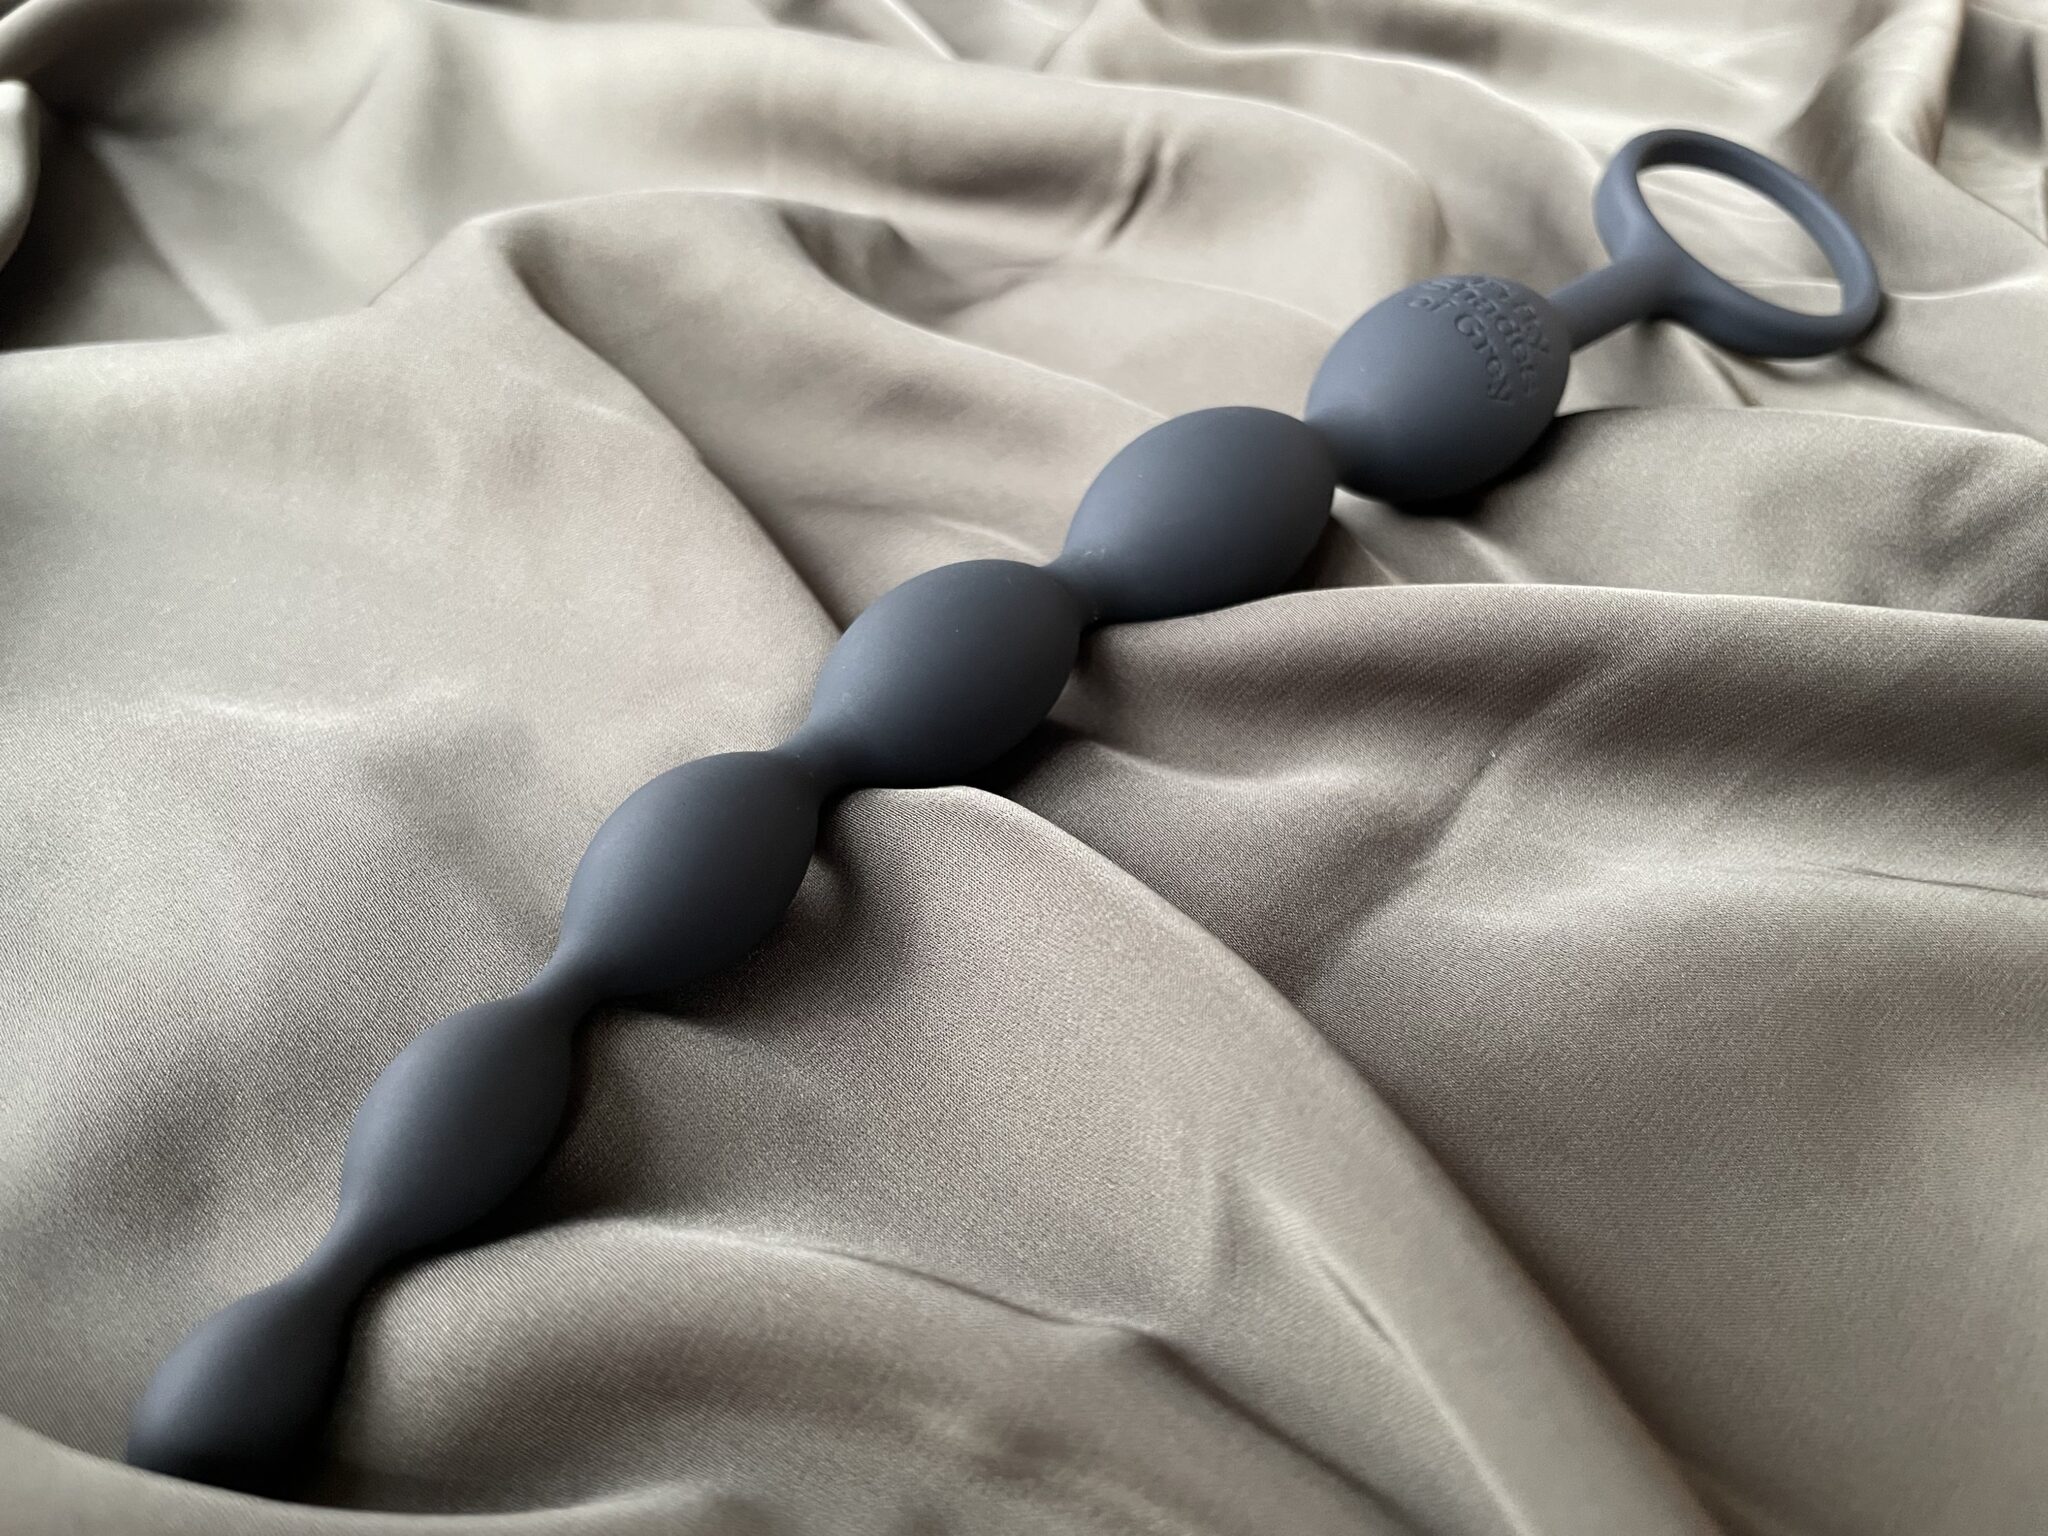 Fifty Shades of Grey Pleasure Intensified Silicone Anal Beads. Slide 5